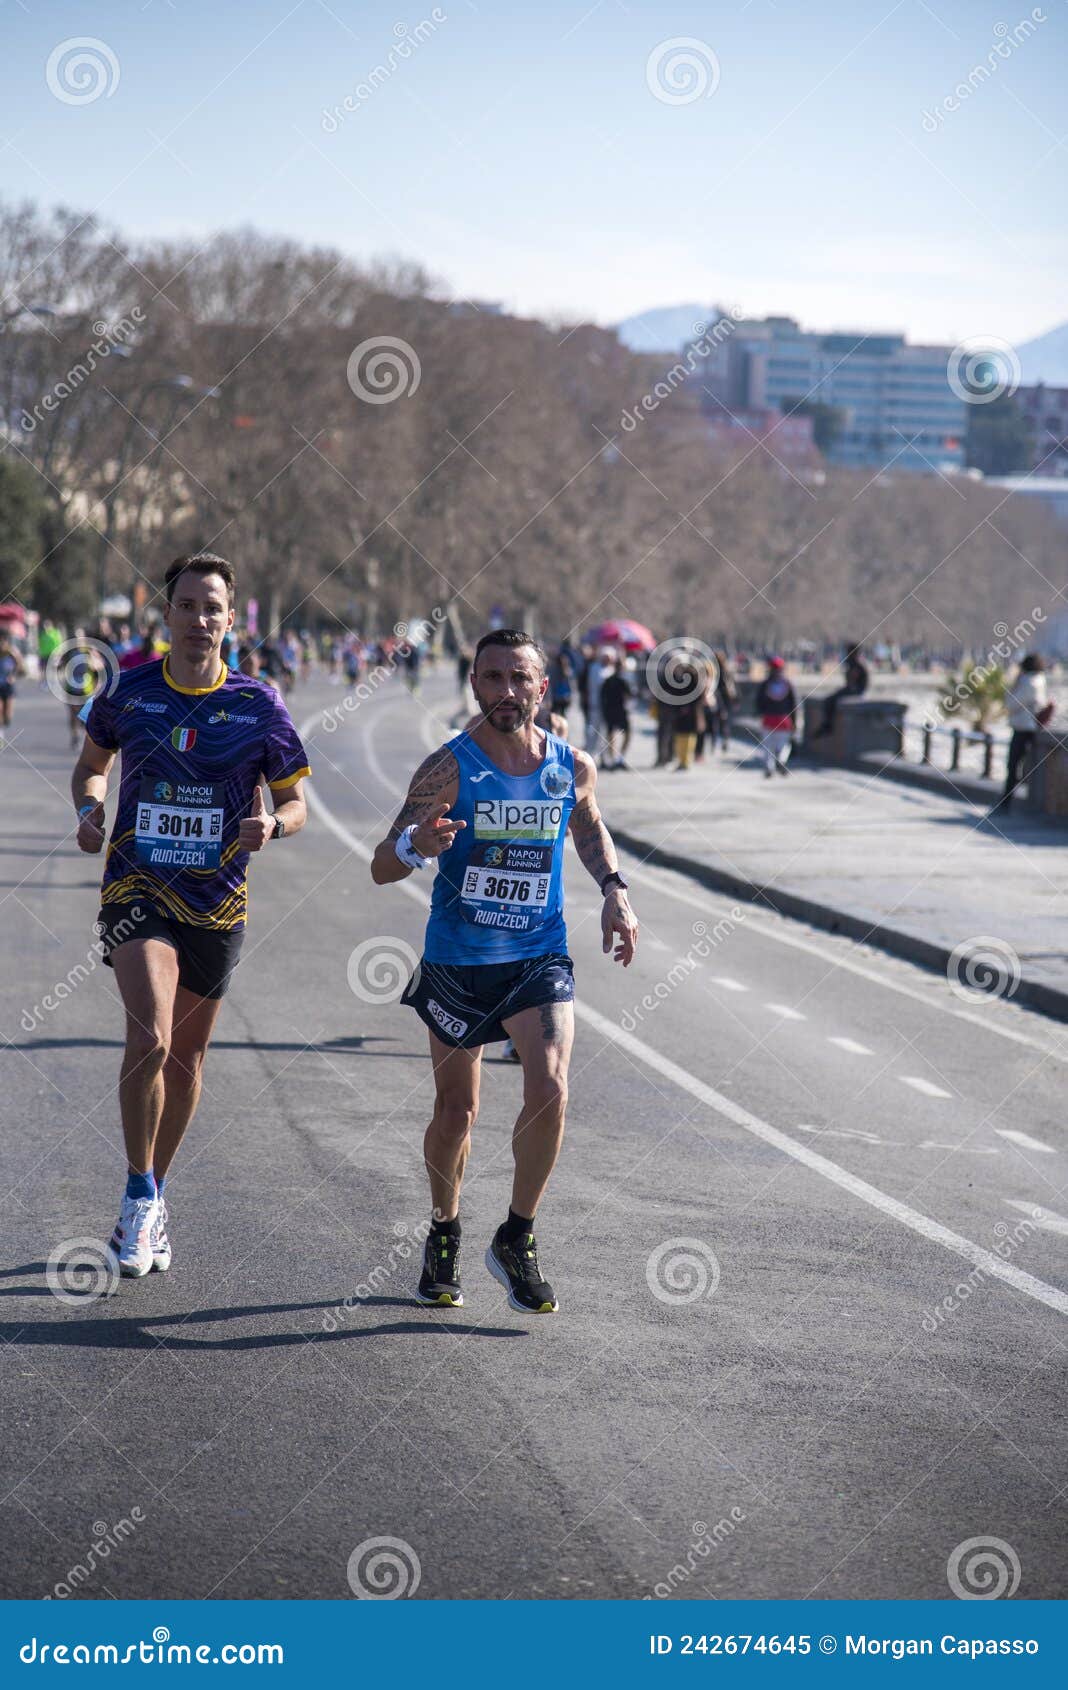 two runners travel along the same straight path